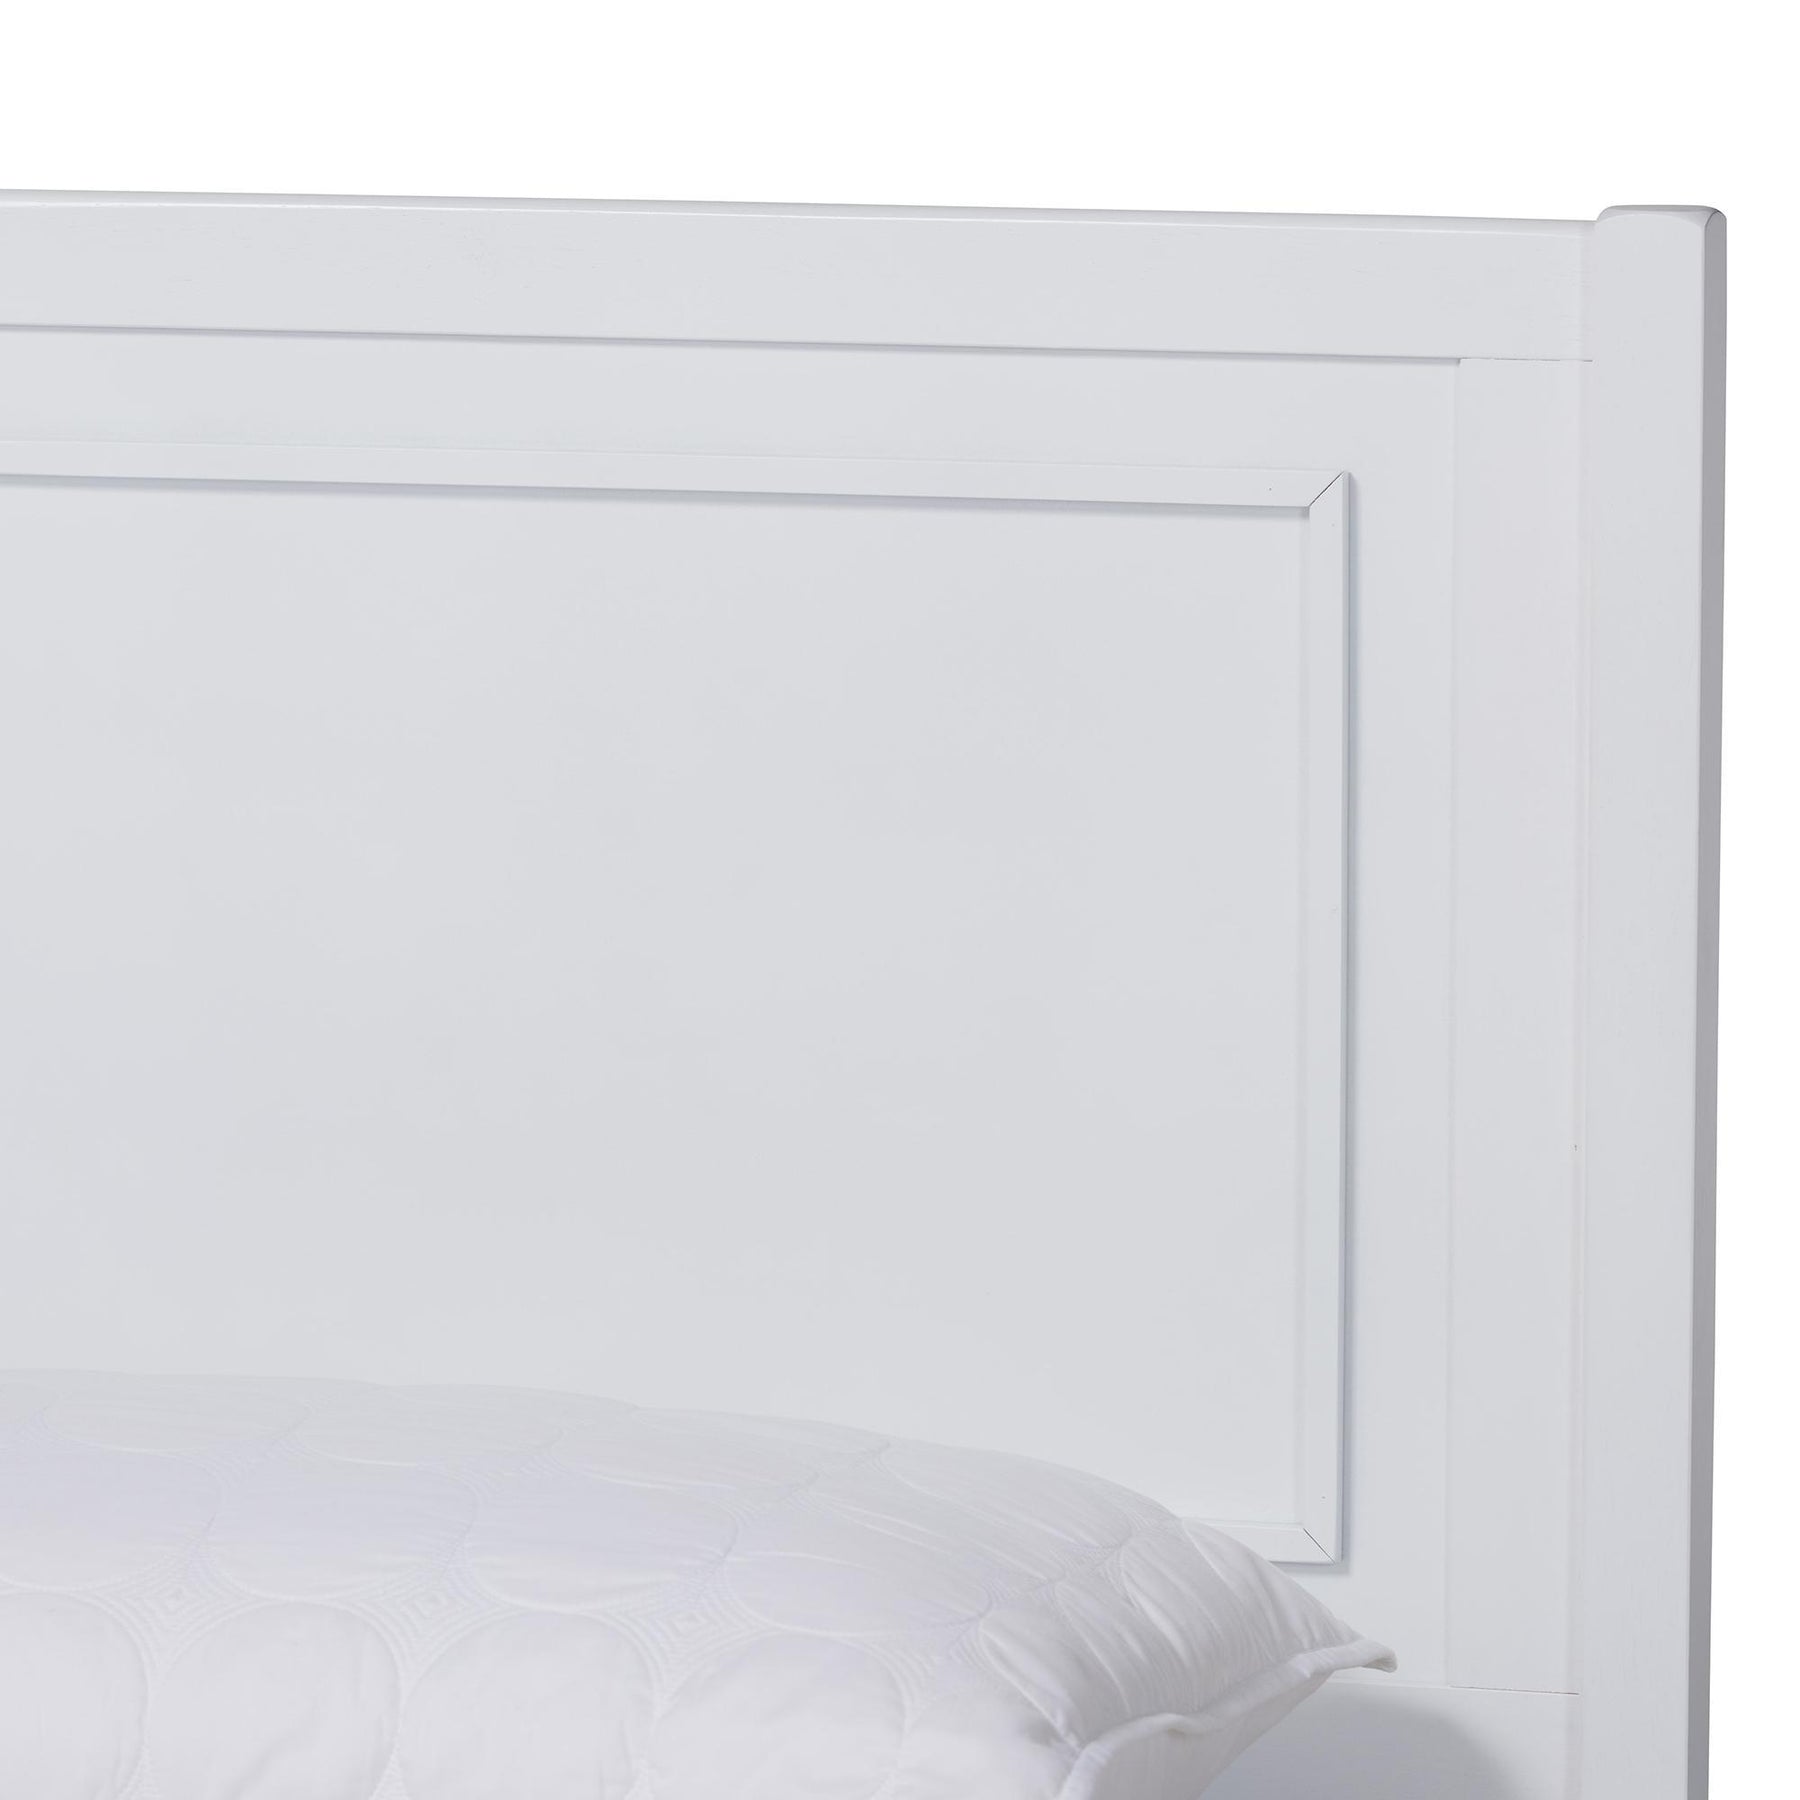 Baxton Studio Daniella Modern And Contemporary White Finished Wood Queen Size Platform Bed - MG0076-White-Queen Bed